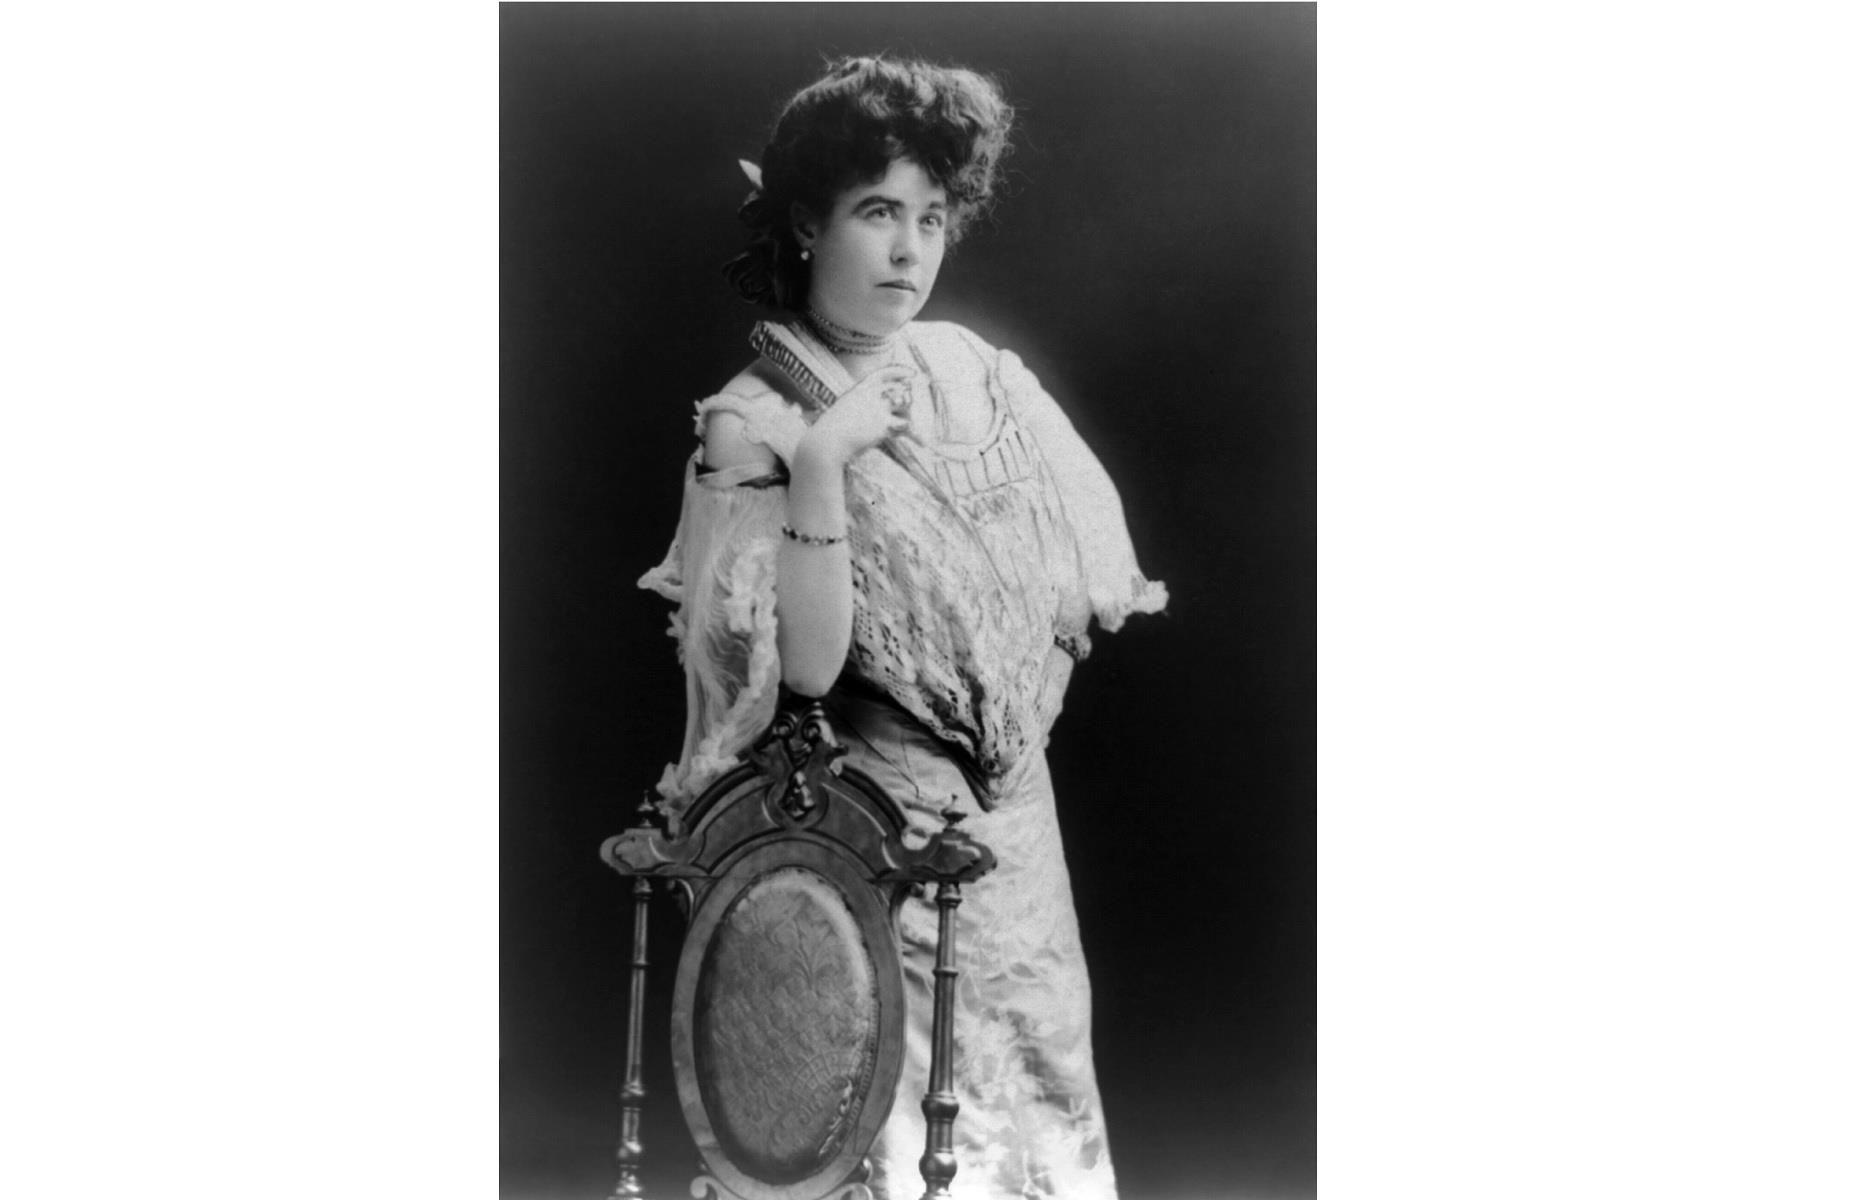 Margaret (Molly) Brown